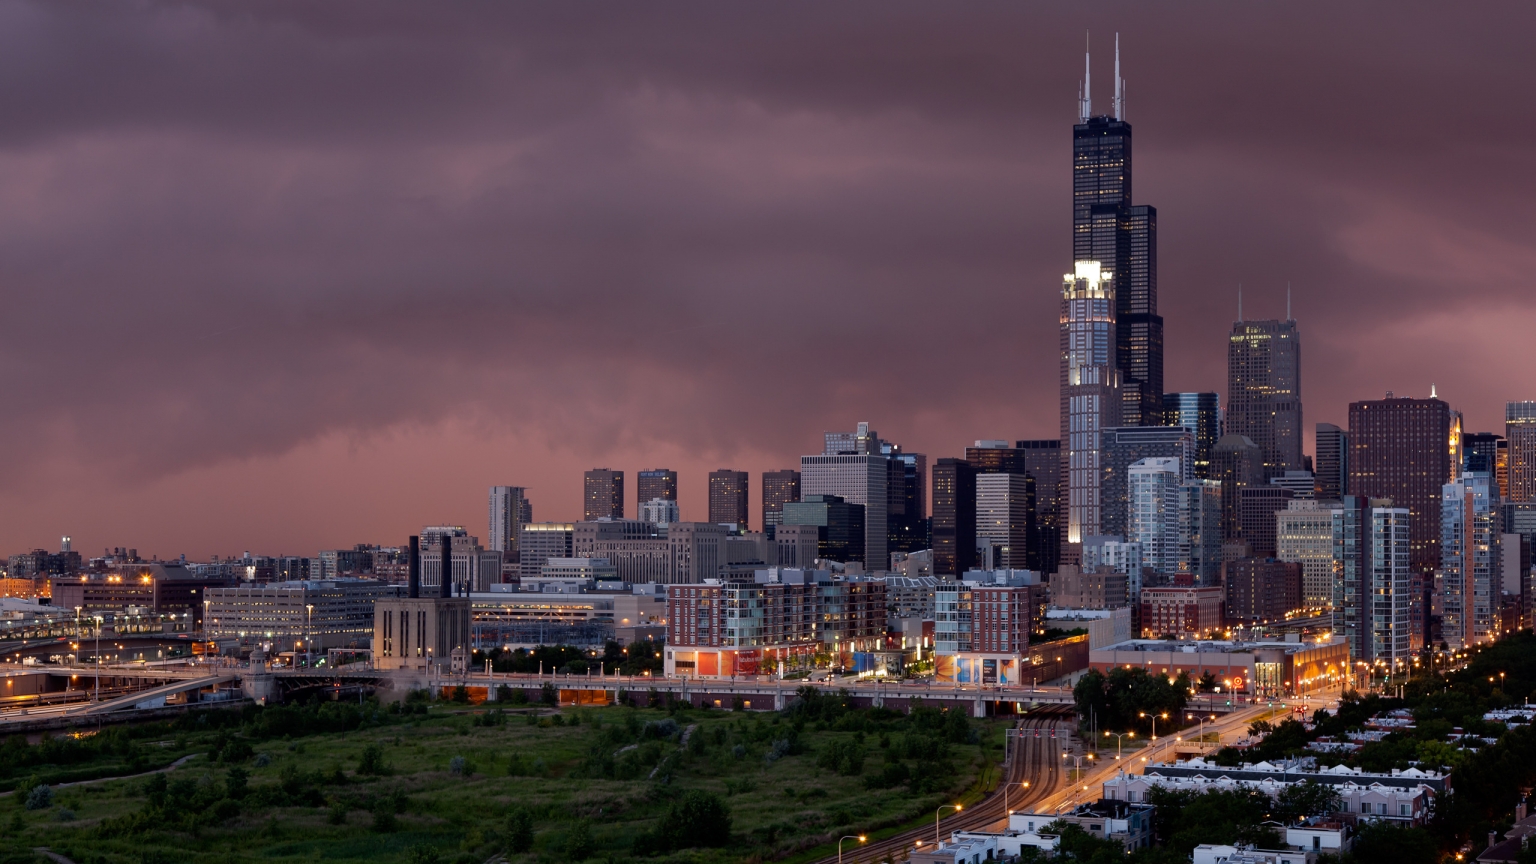 Sunset and Storm in Chicago for 1536 x 864 HDTV resolution